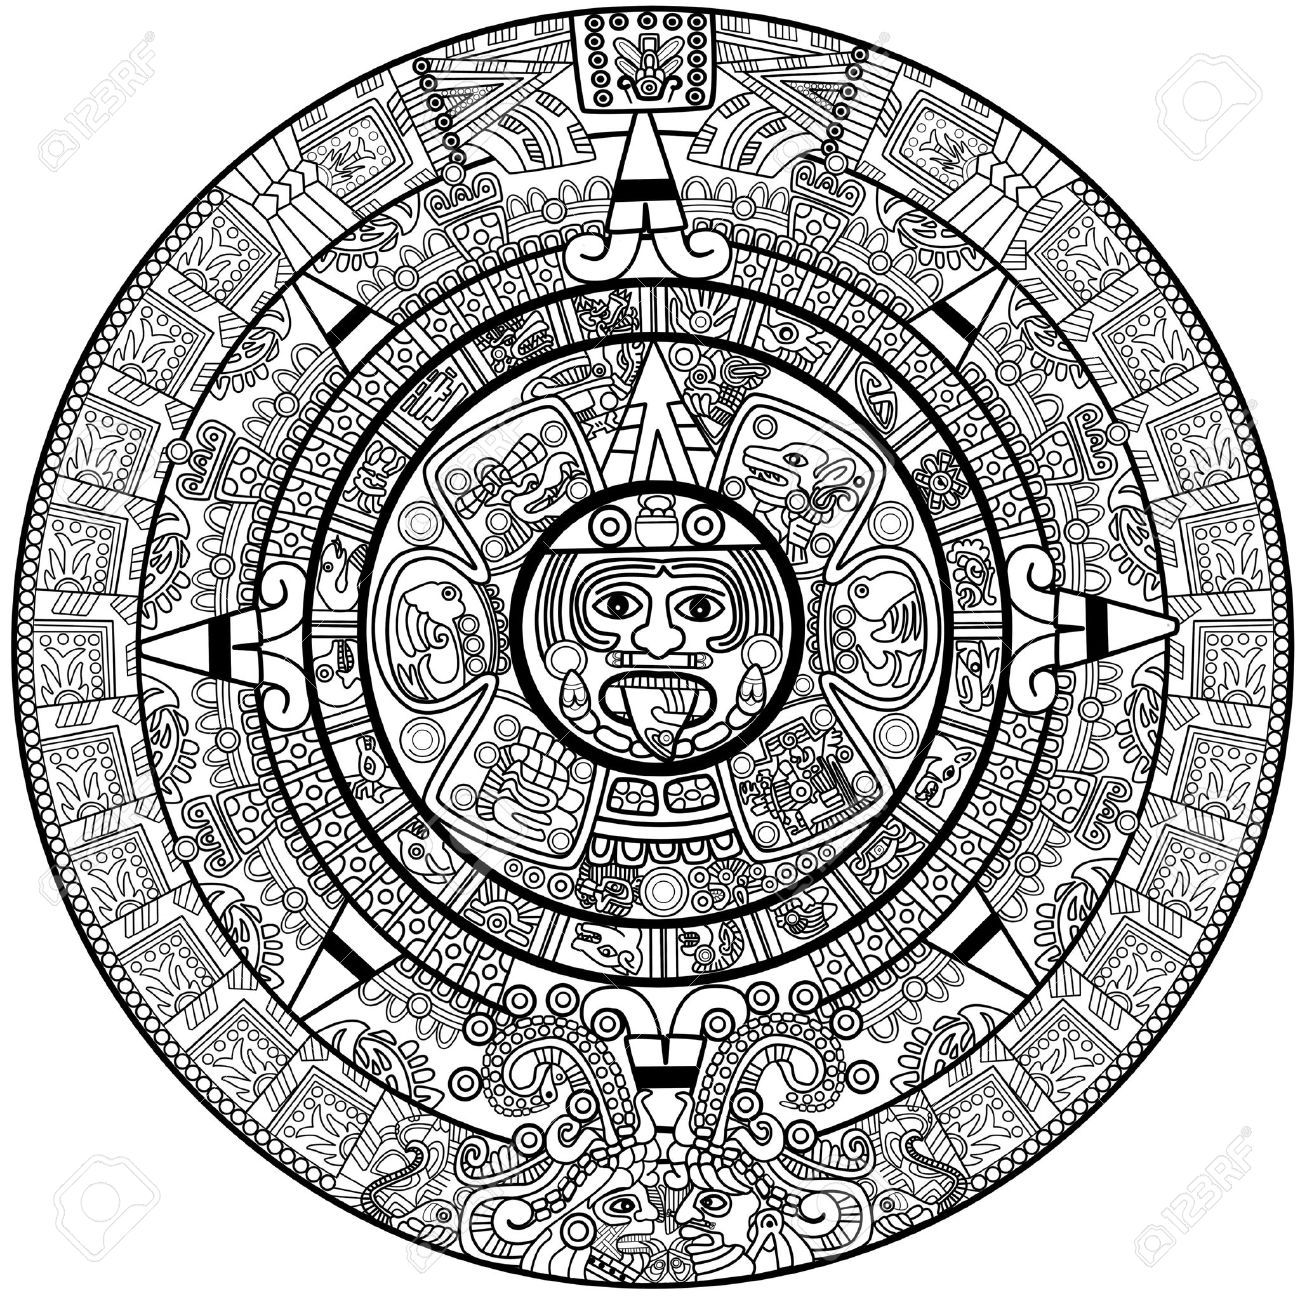 aztec-calendar-drawing-free-download-on-clipartmag